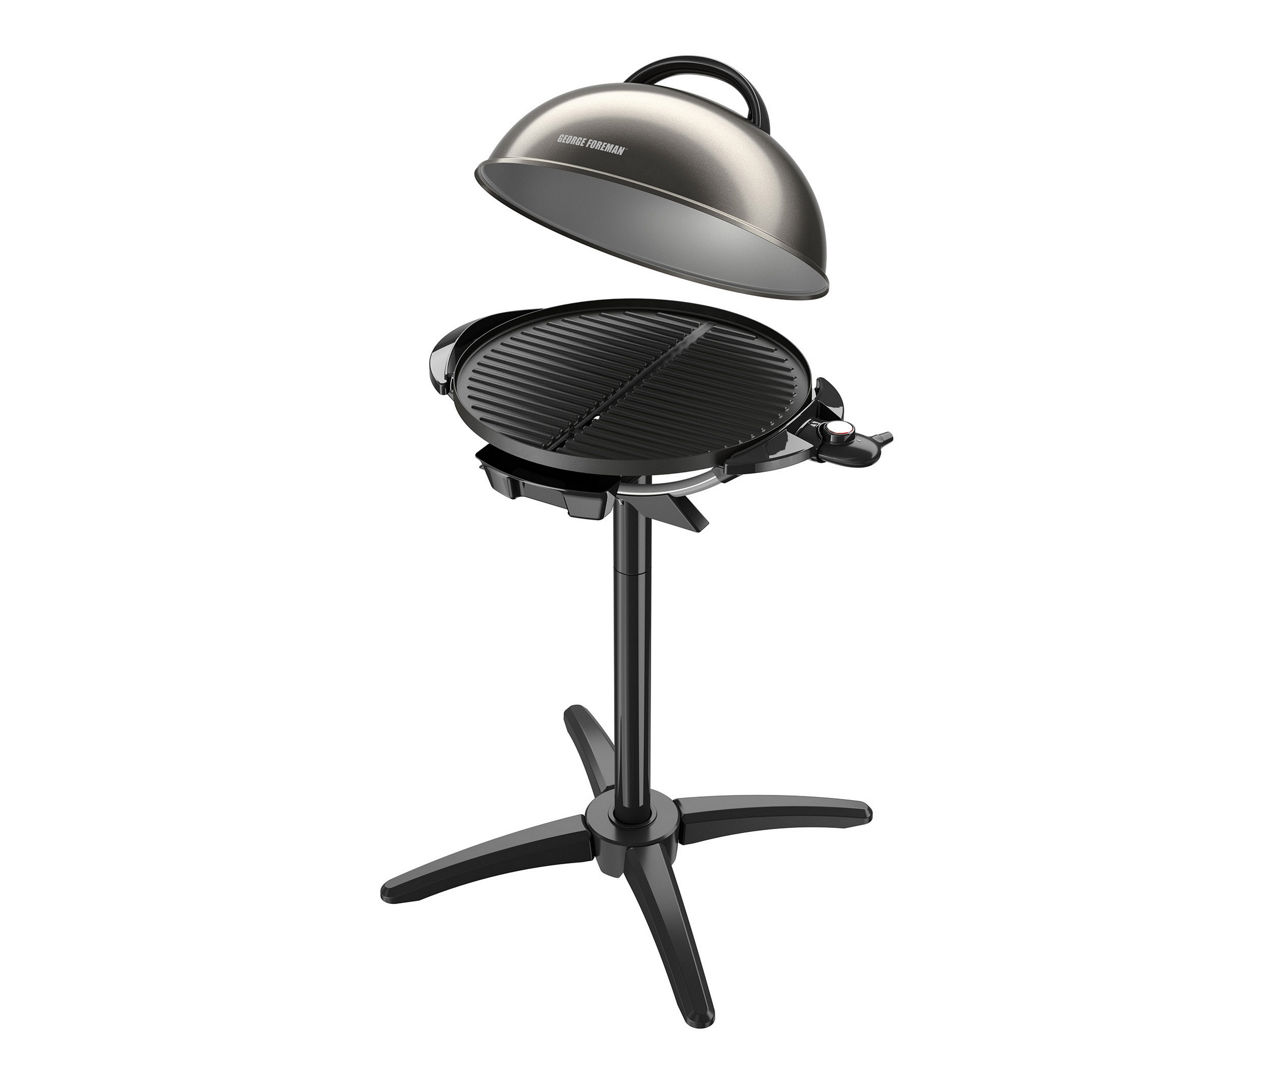 IndoorOutdoor 15+ Serving Domed Electric Grill with Ceramic